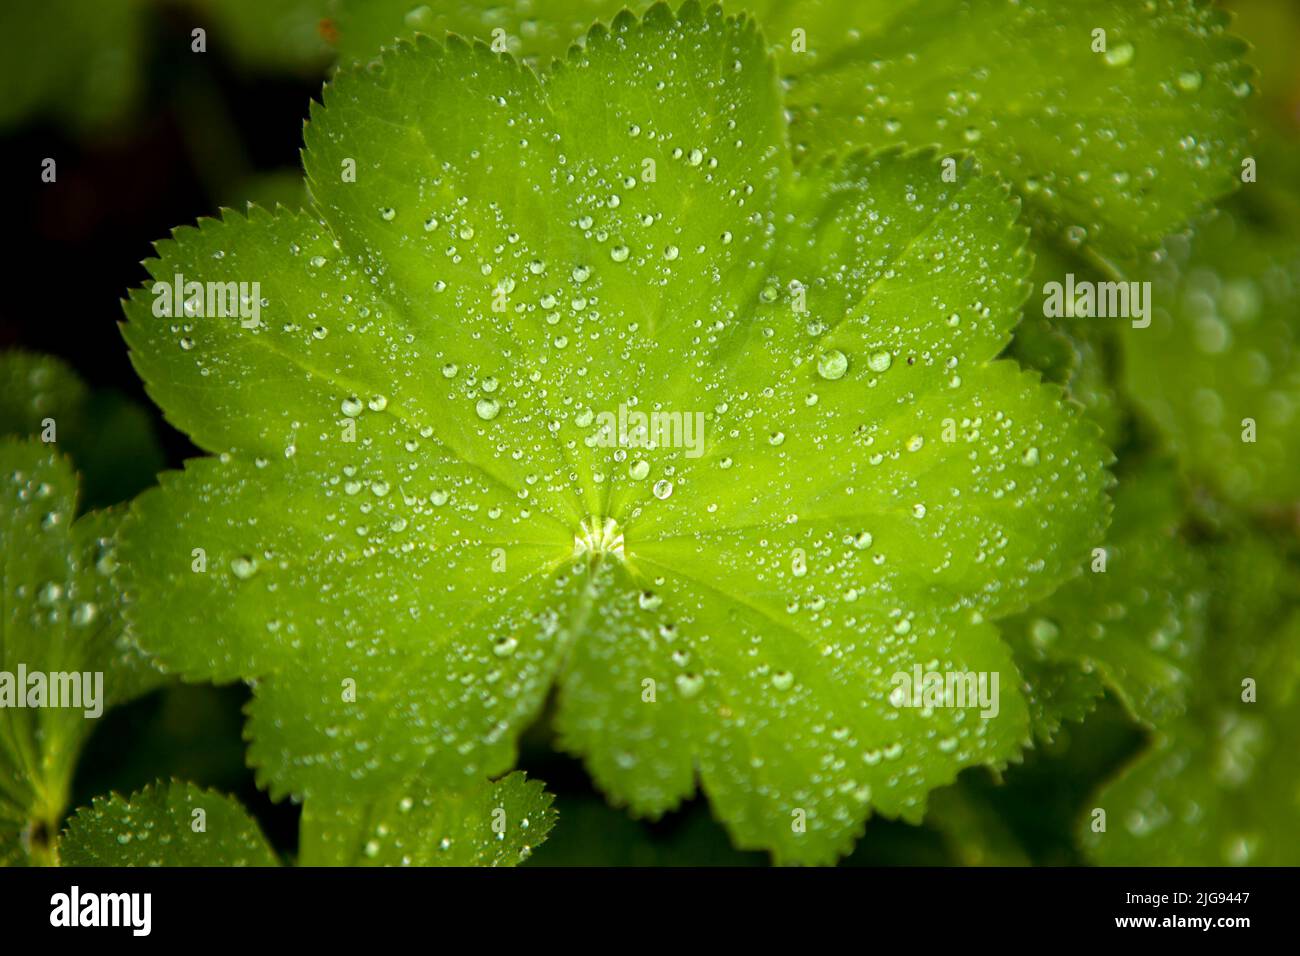 lady-s mantles plant - green leaf with water drops or raindrops Stock Photo